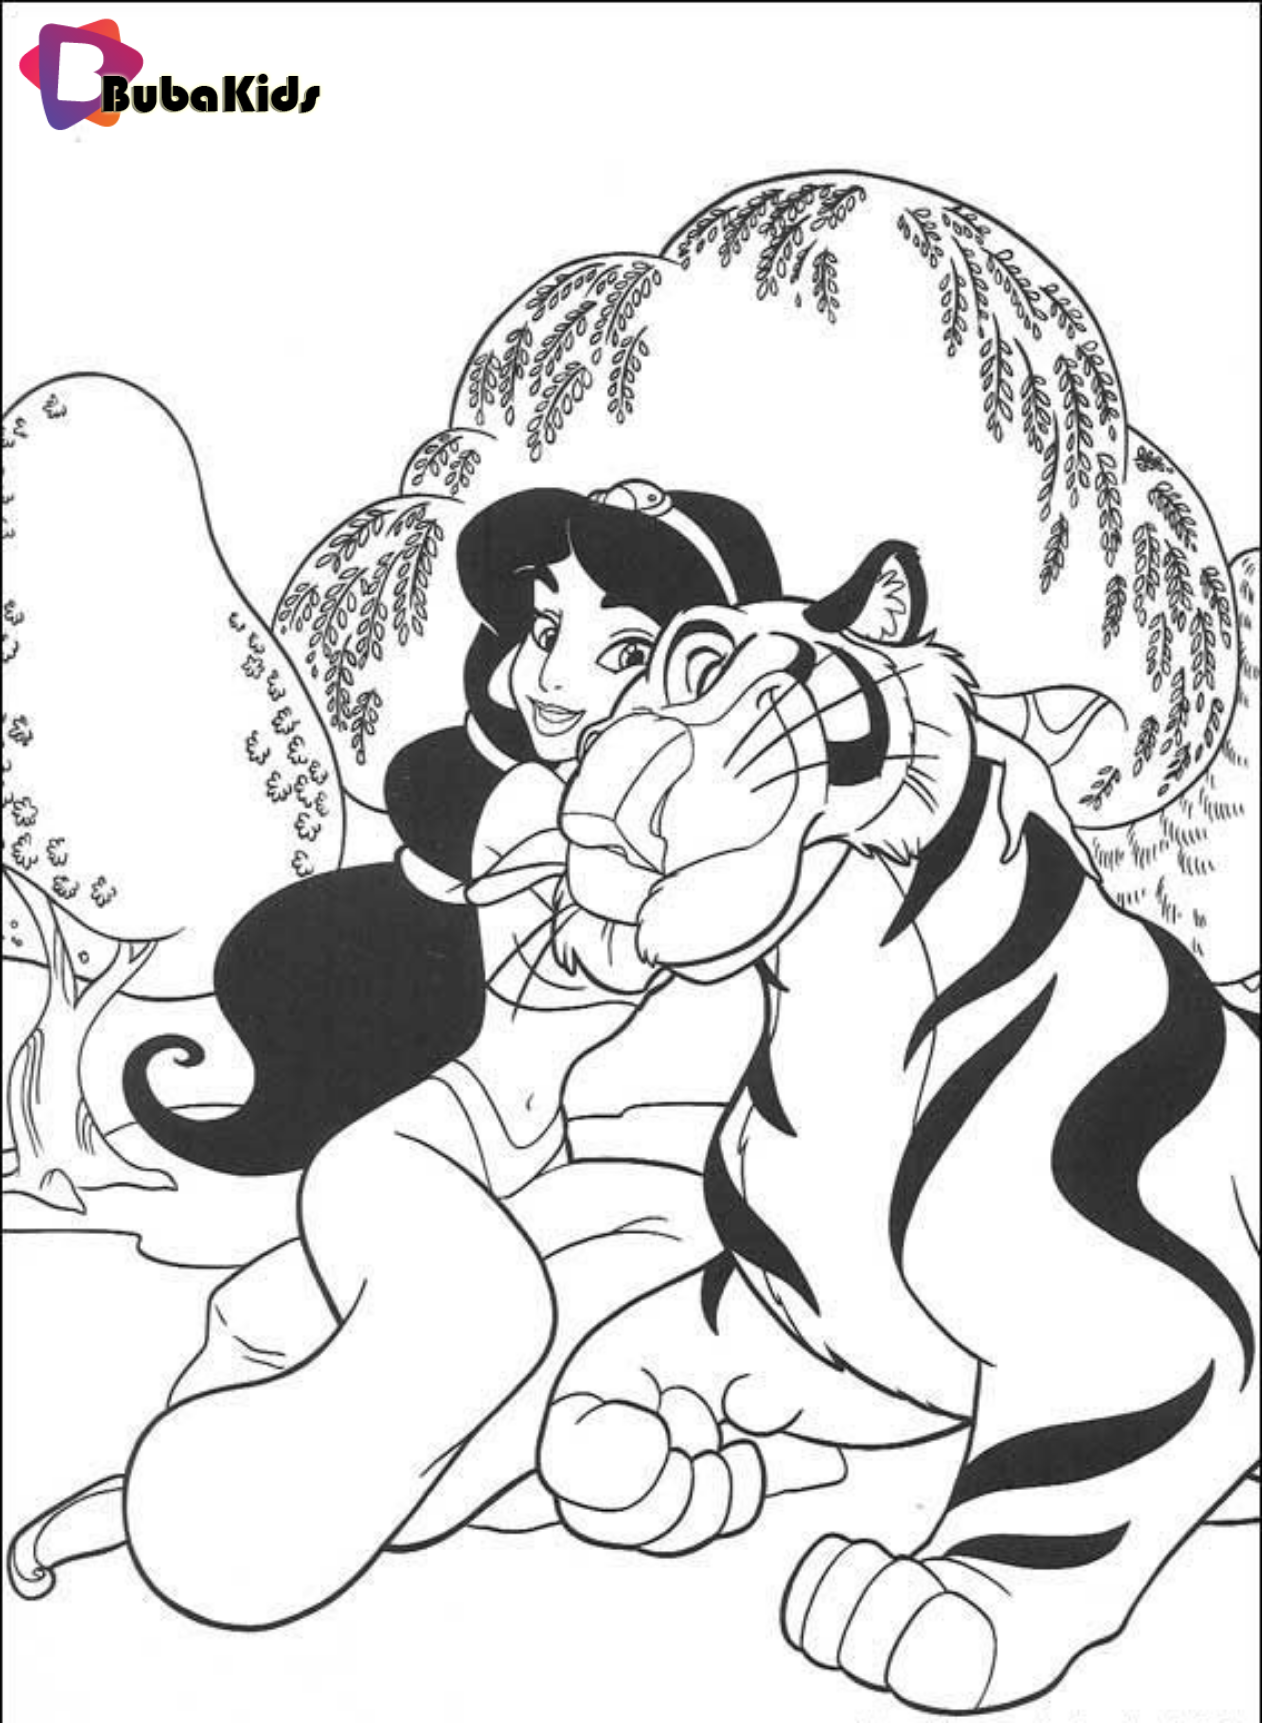 Aladdin coloring picture. Princess Jasmine and Rajah the tiger coloring pages on bubakids.com Wallpaper